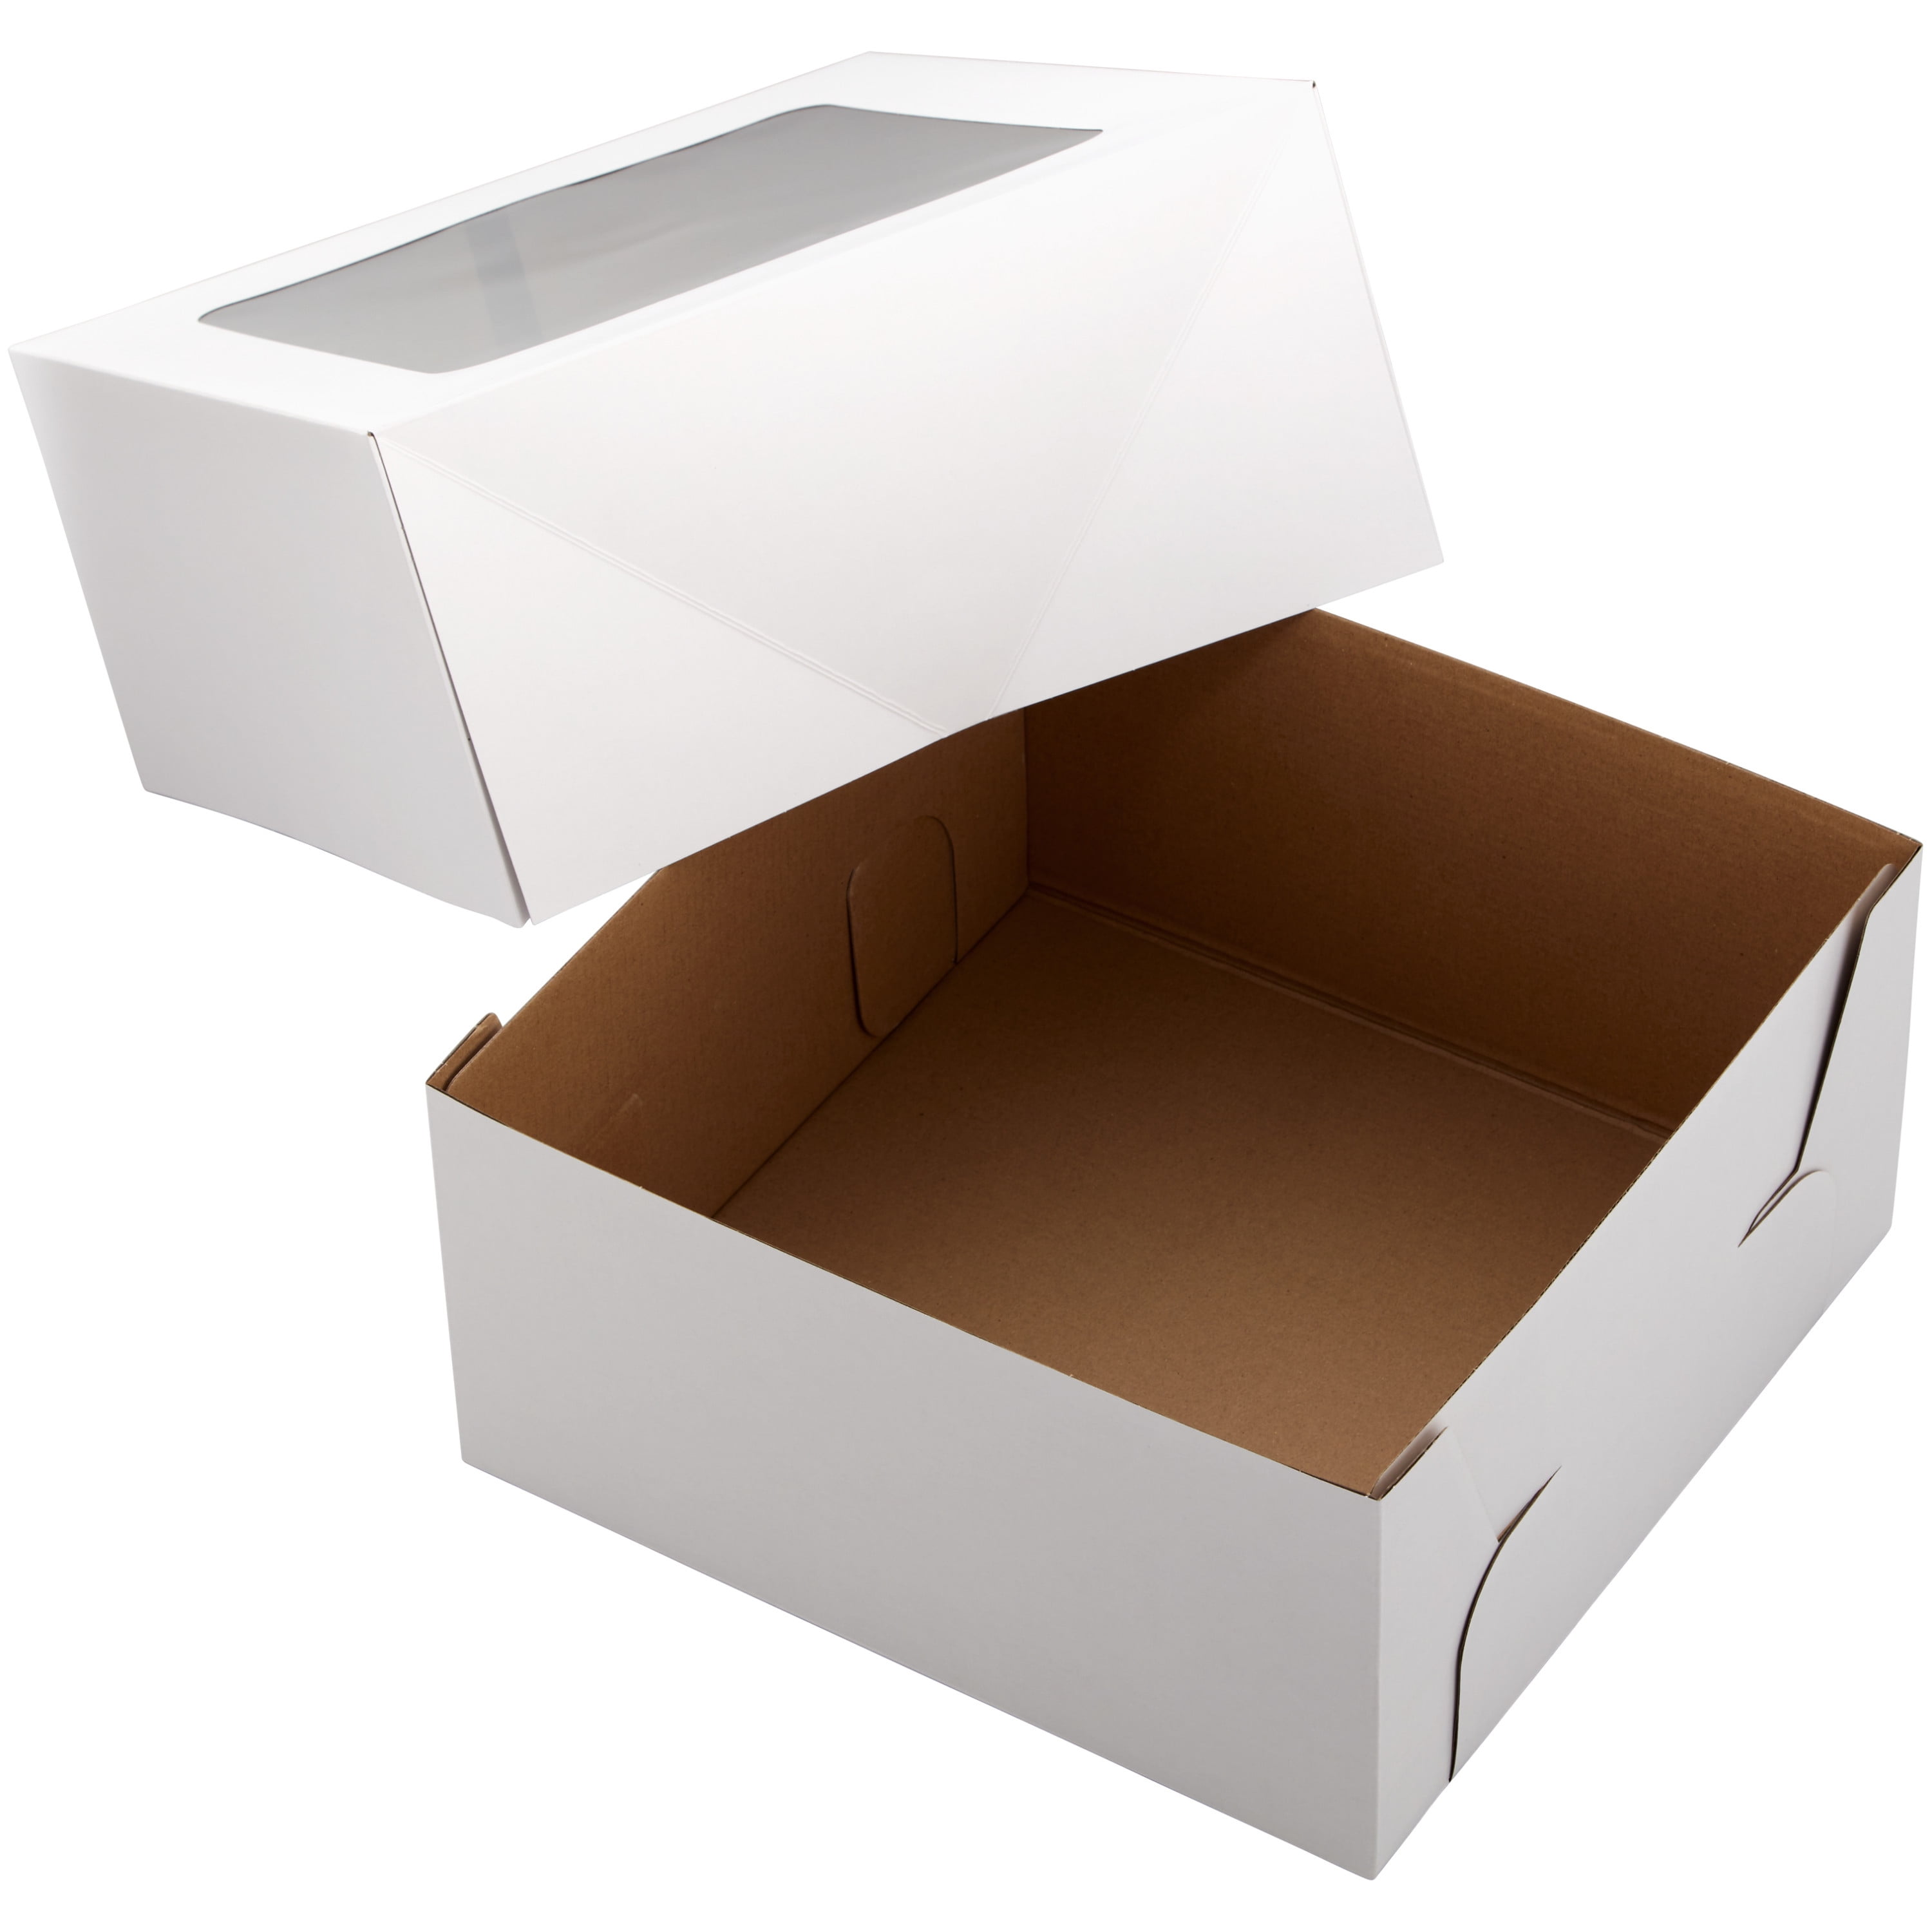 12" Cake Box White Carrier with Lid for Wedding Birthday Cakes 